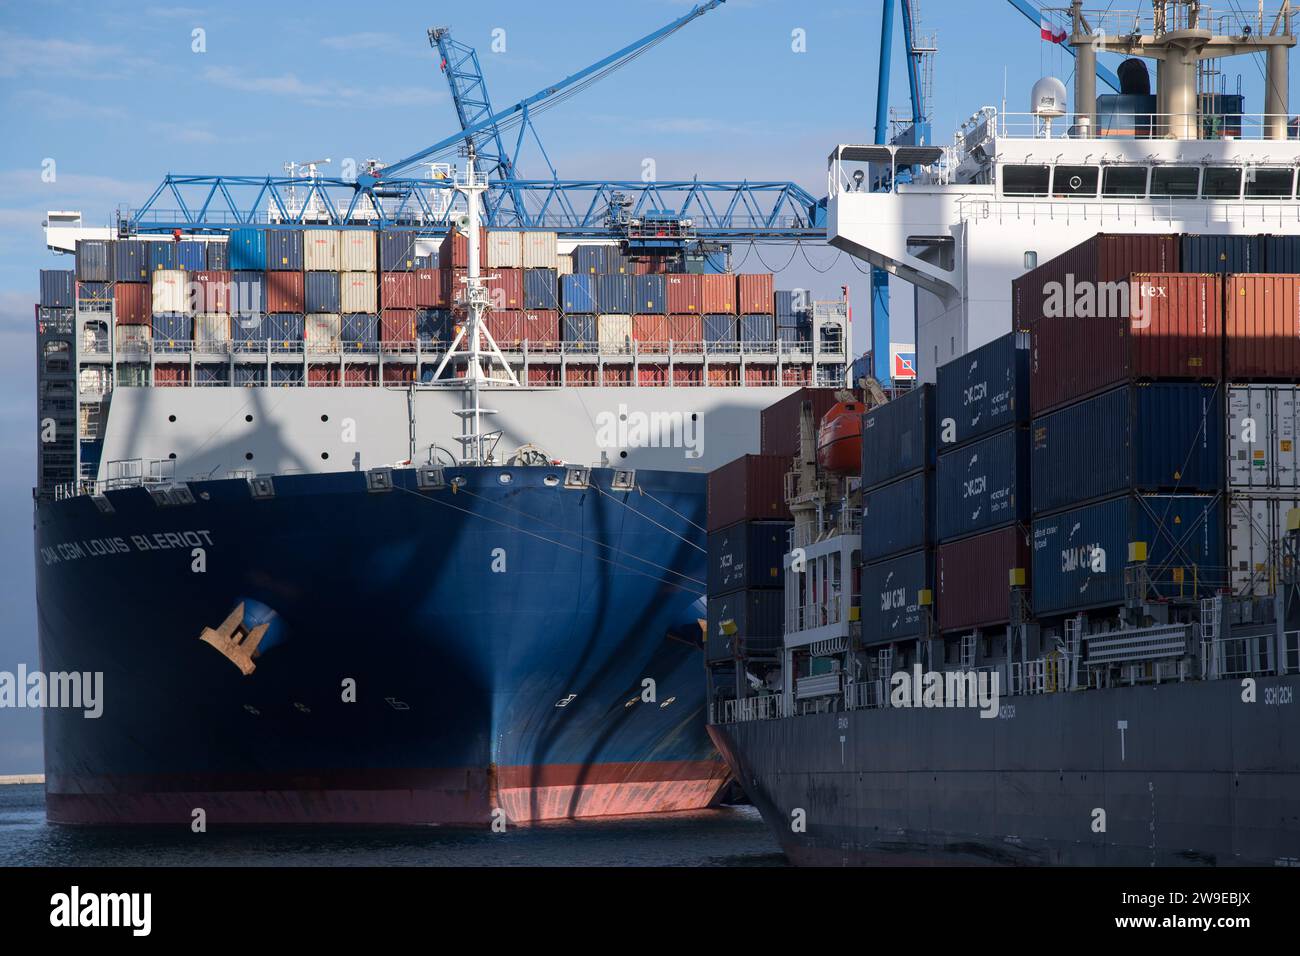 CMACGM Louis Bleriot Container Ship in Baltic Hub, ex Deepwater Container Terminal DCT, a Danzica, Polonia © Wojciech Strozyk / Alamy Stock Photo Foto Stock